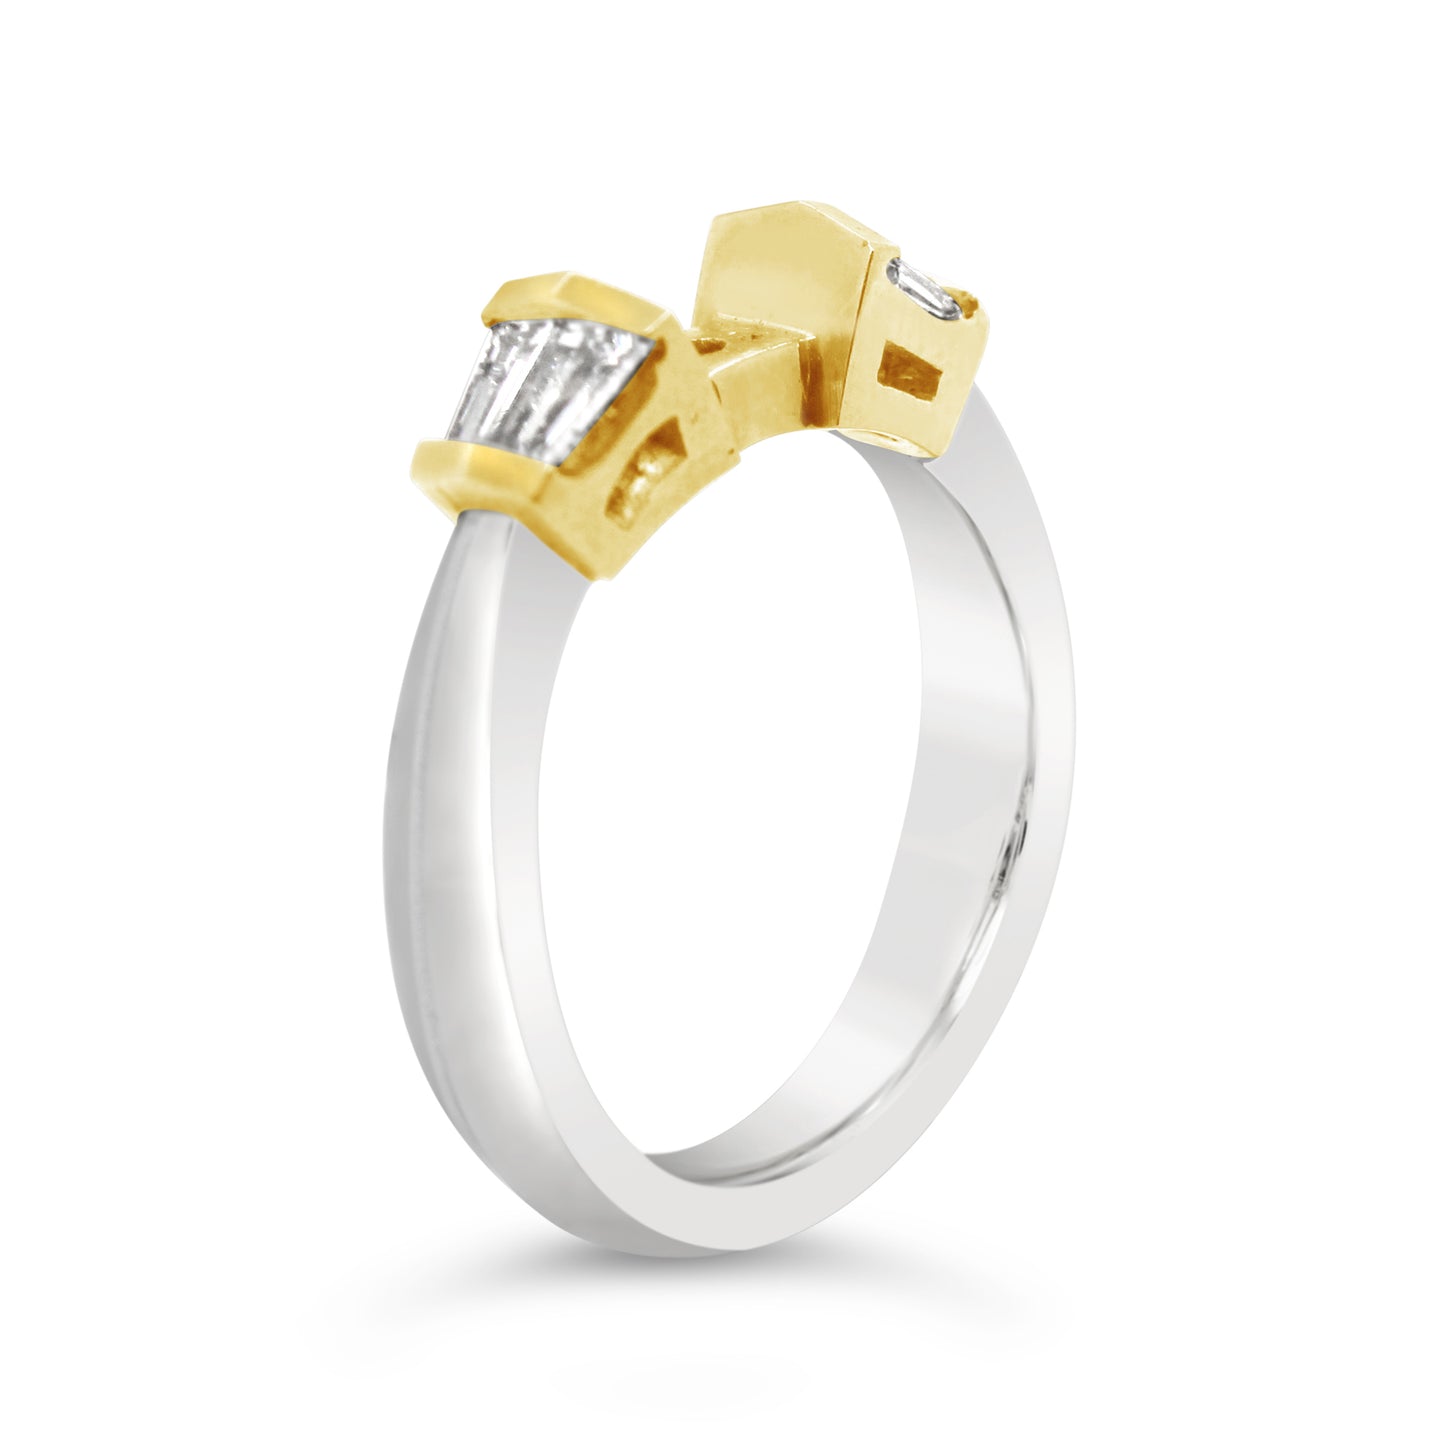 Platinum and 18k Yellow Gold Baguette Diamond Engagement Ring